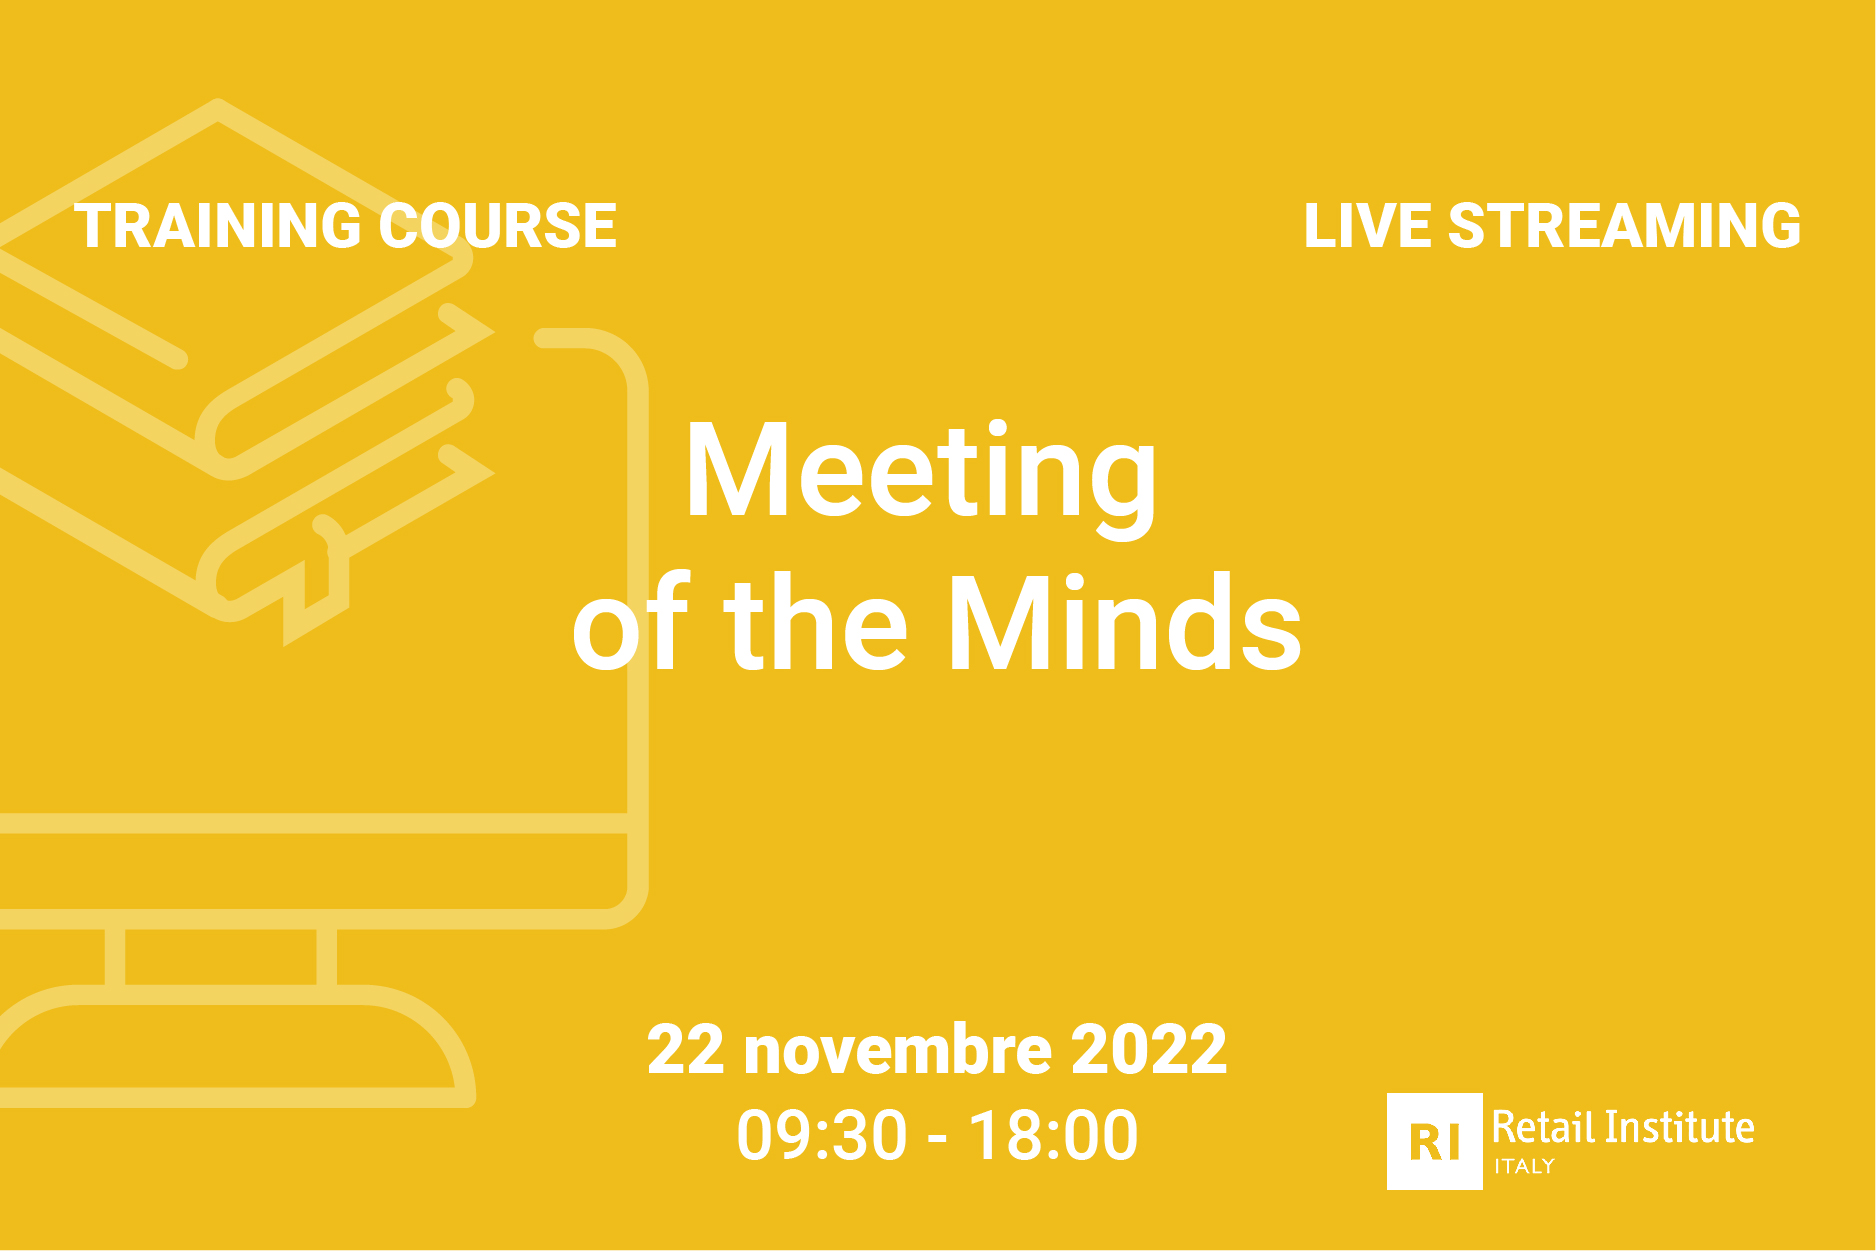 Training Course “Meeting of the Minds” – 22 novembre 2022